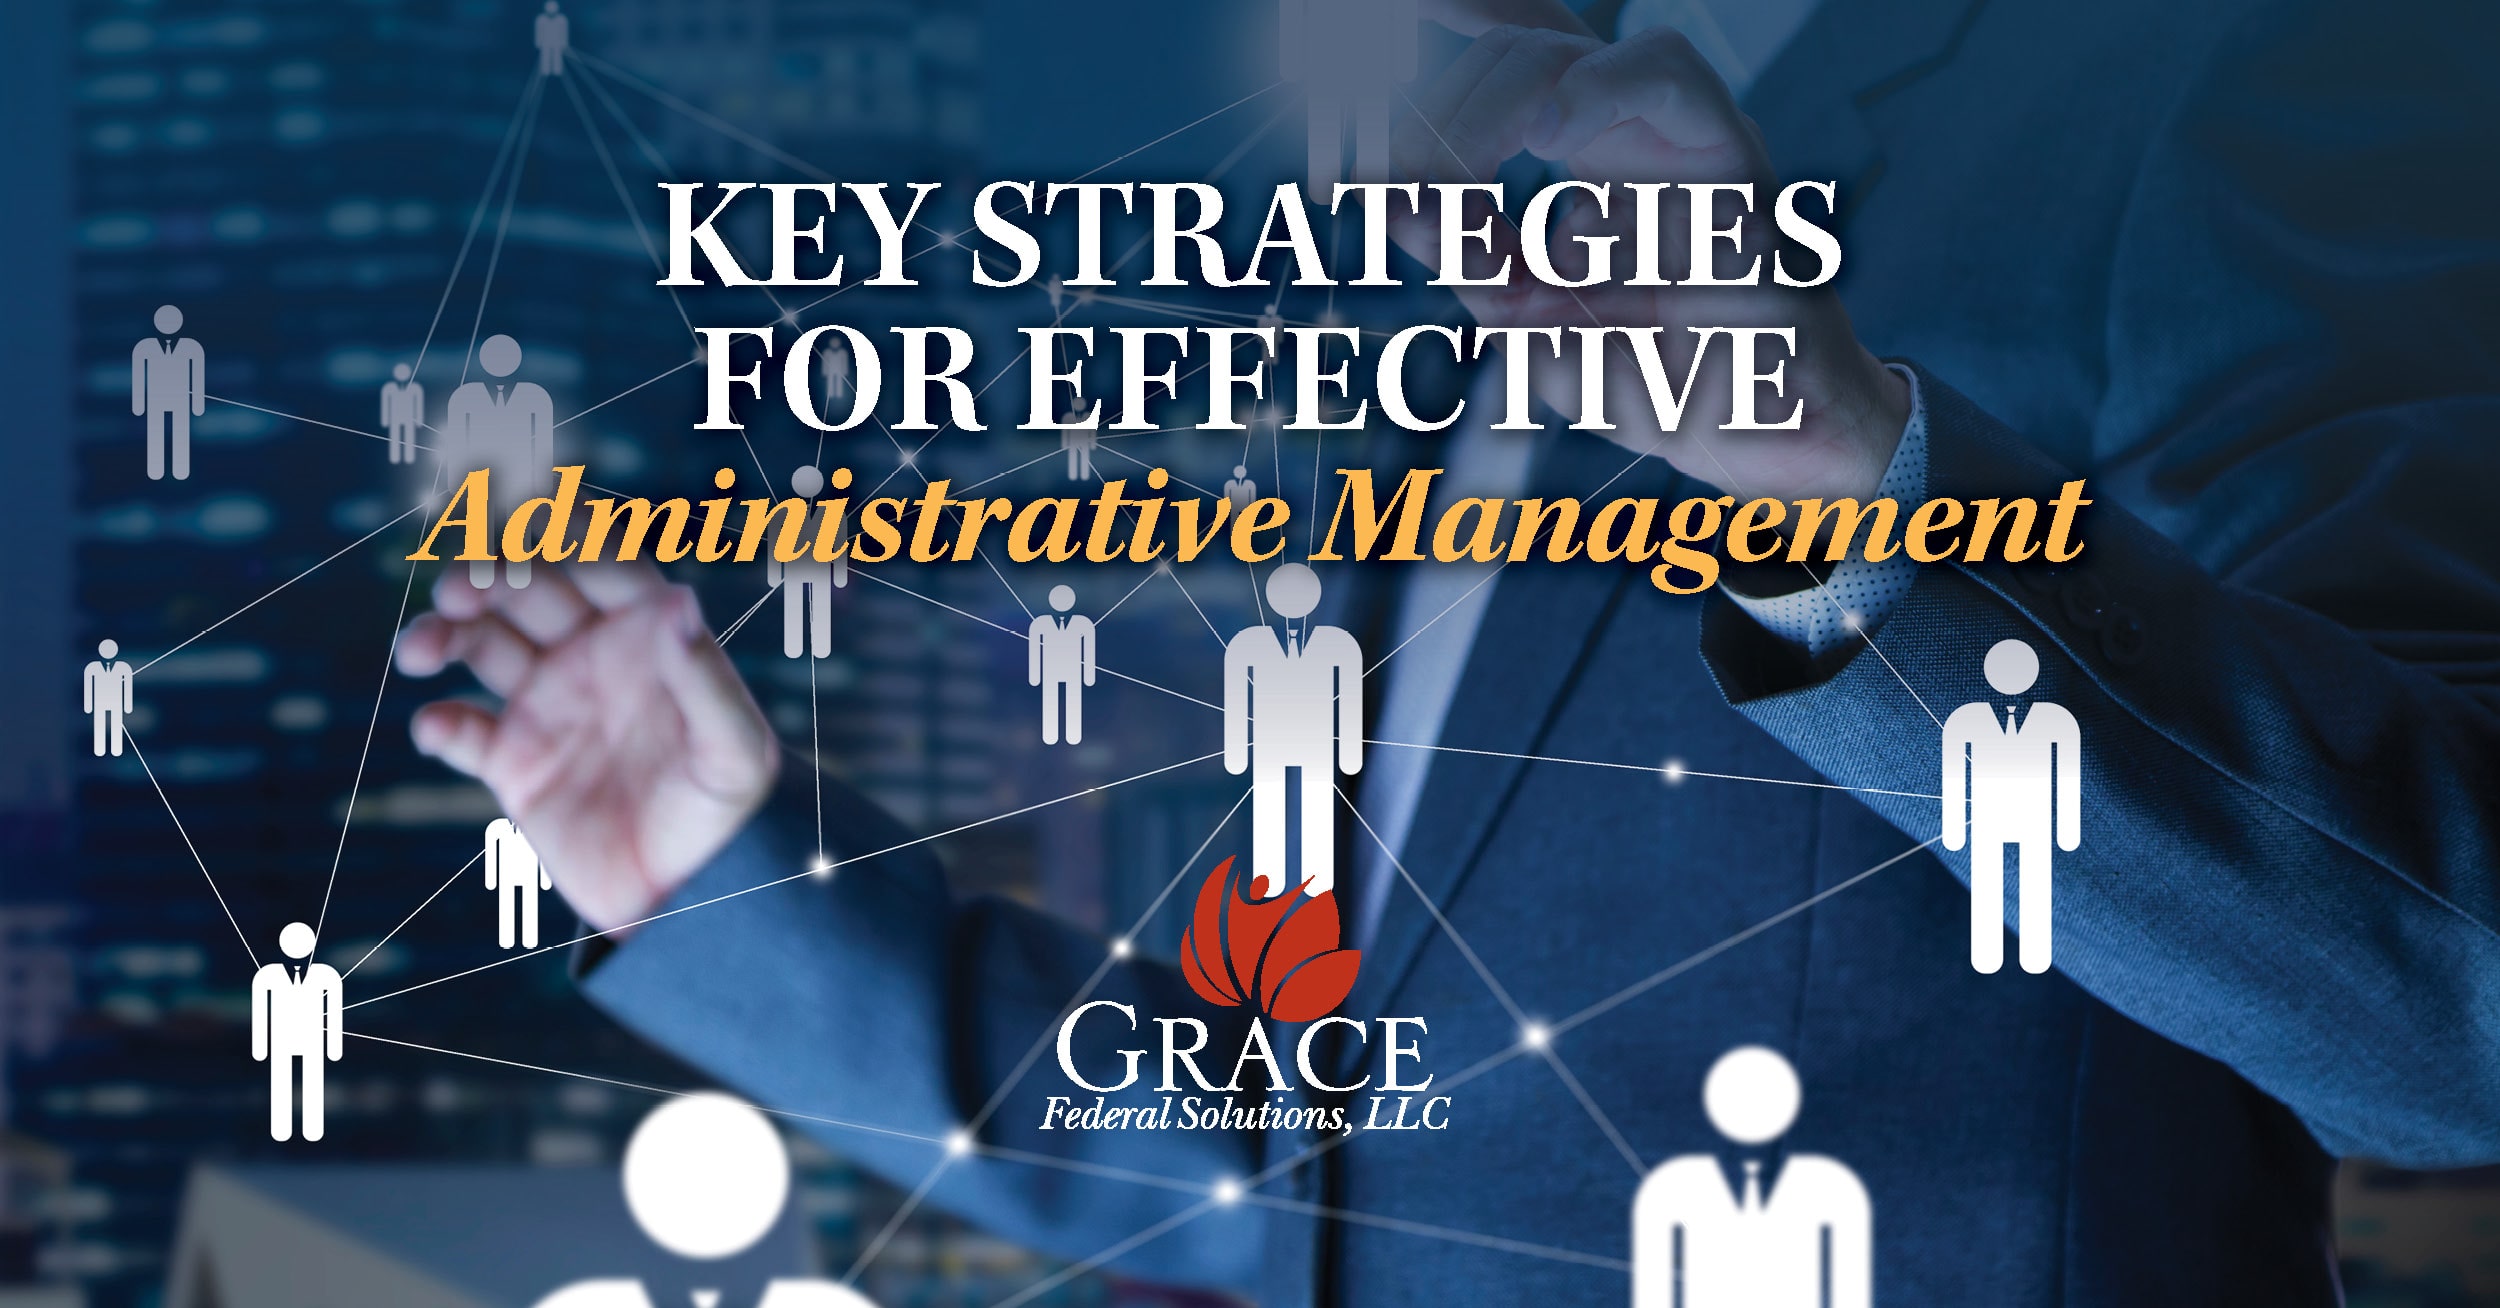 Key Strategies for Effective Administrative Management